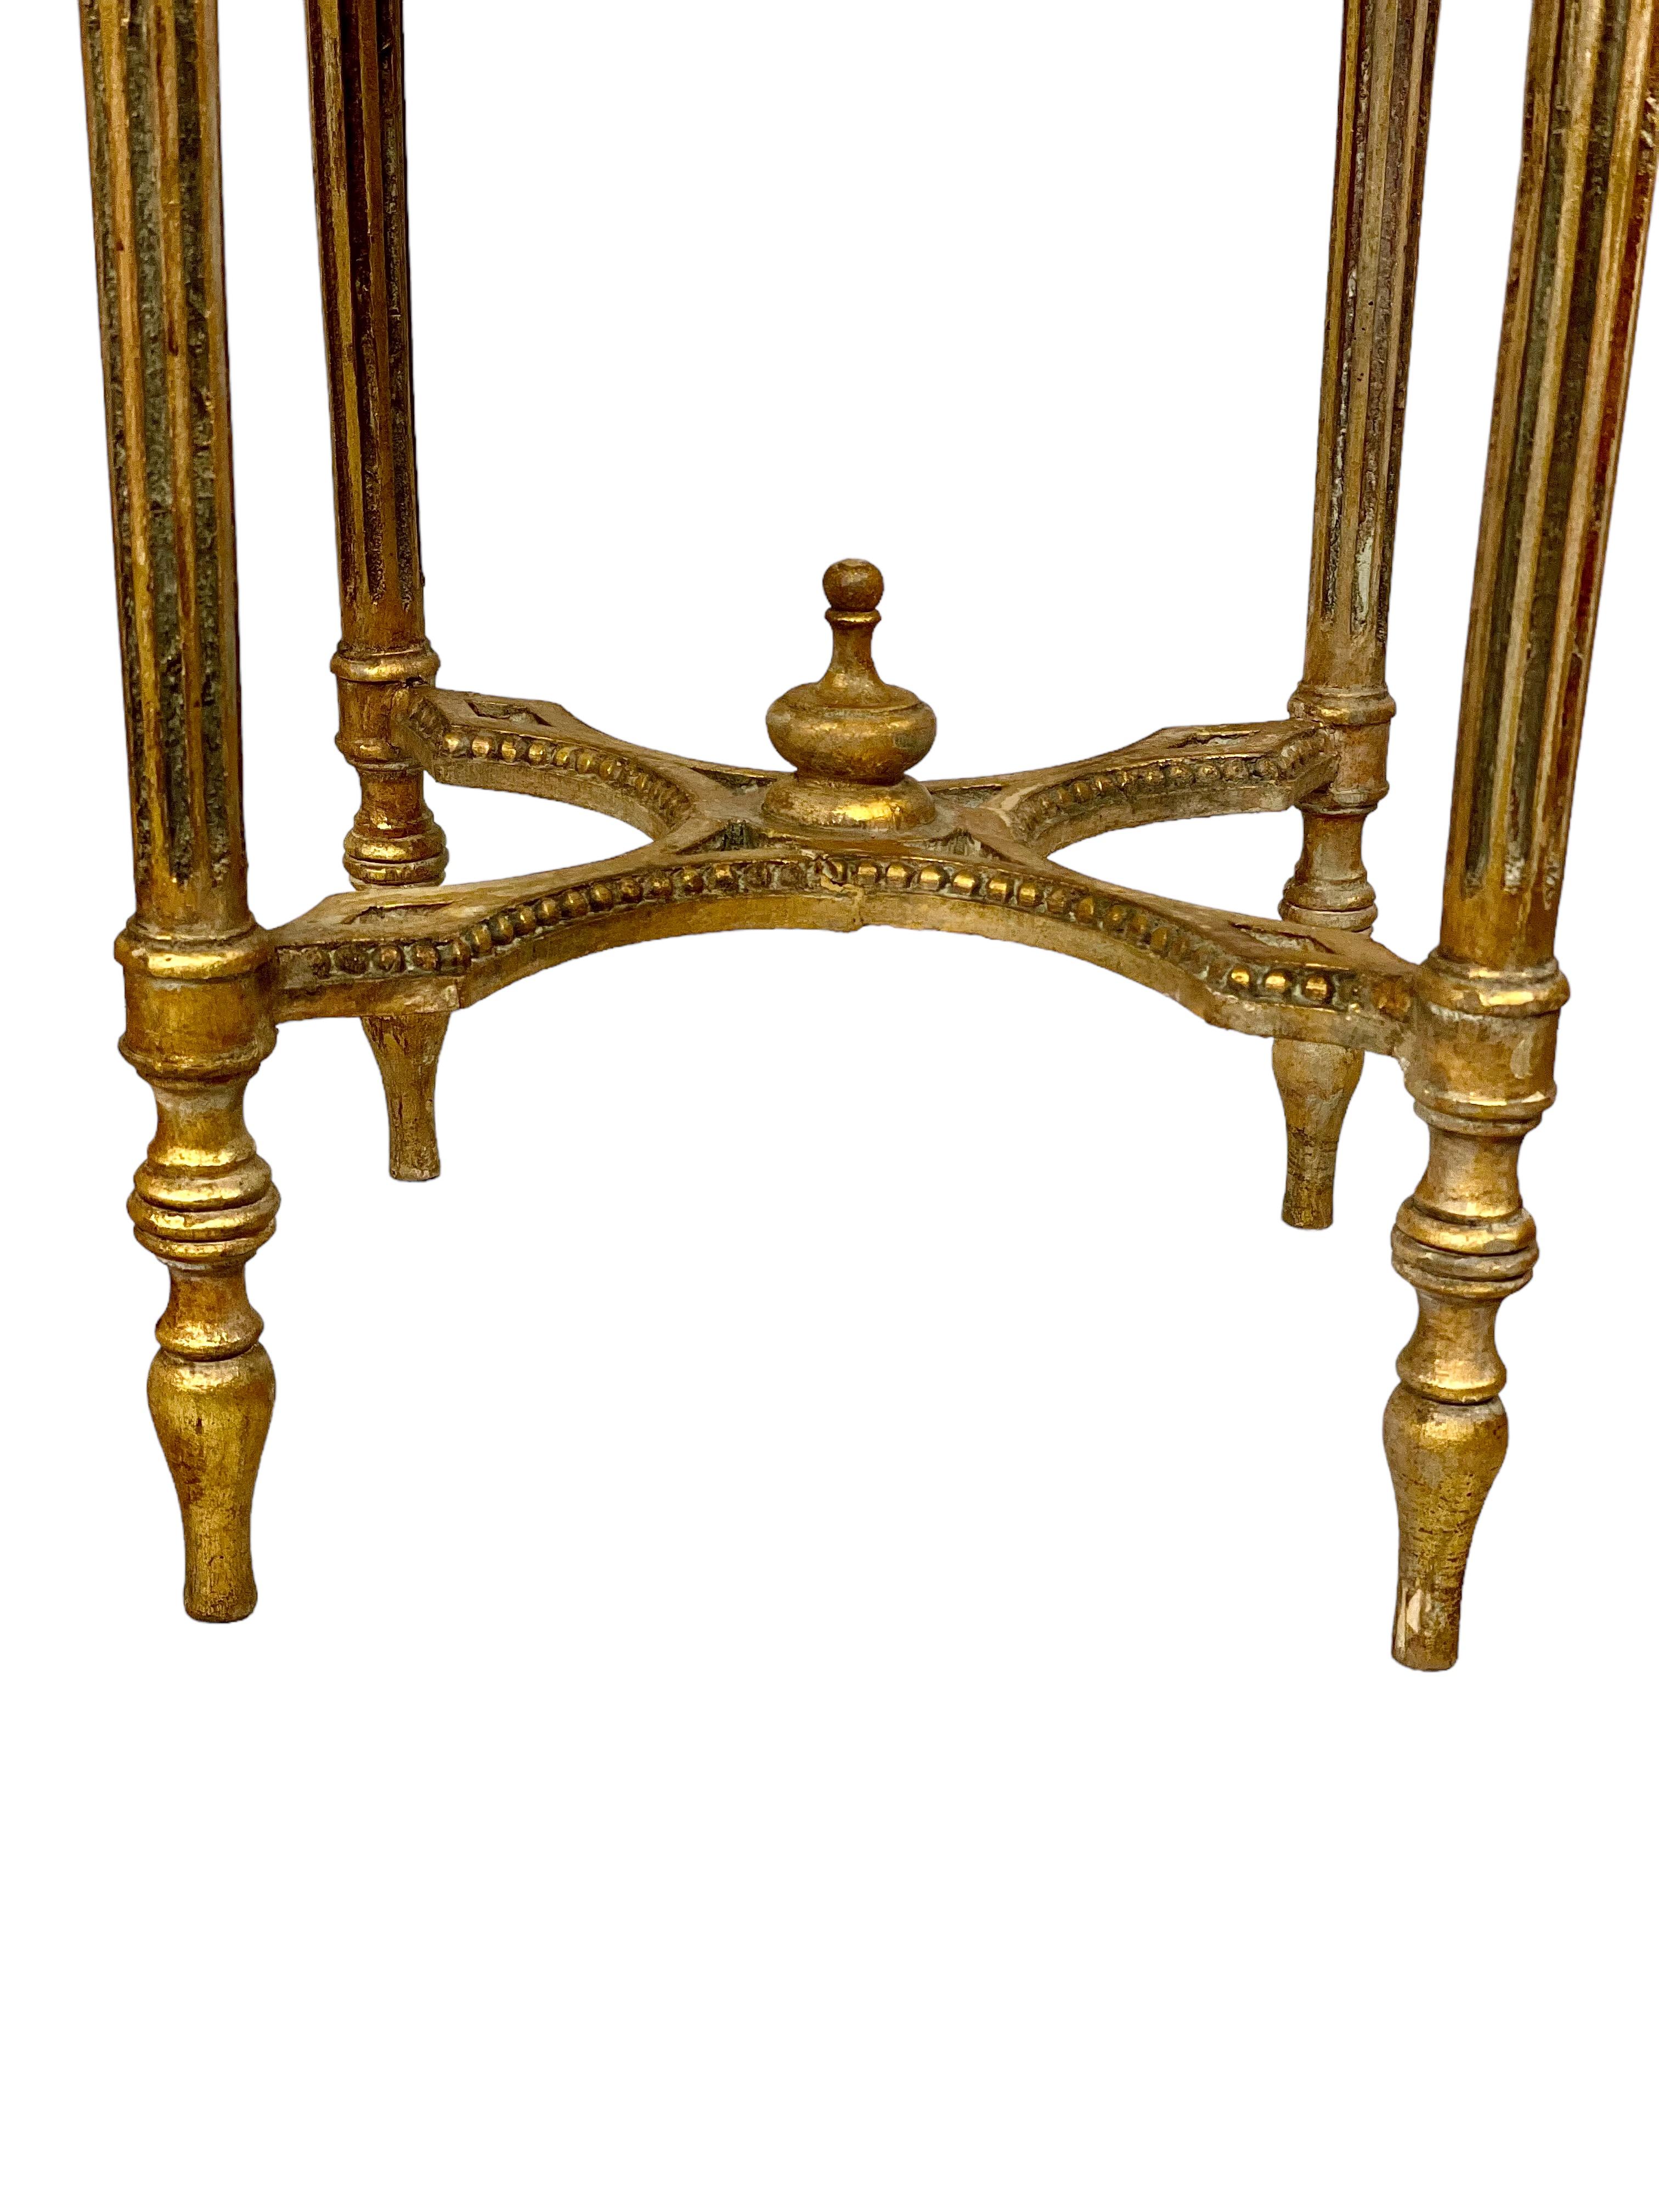 This fabulous Louis XVI-style giltwood and marble gueridon table, or plant stand, dates from the 19th century and features an impressive moulded-edged top tray of dark green Pyrenean marble. This sits above a profusely carved and highly decorative